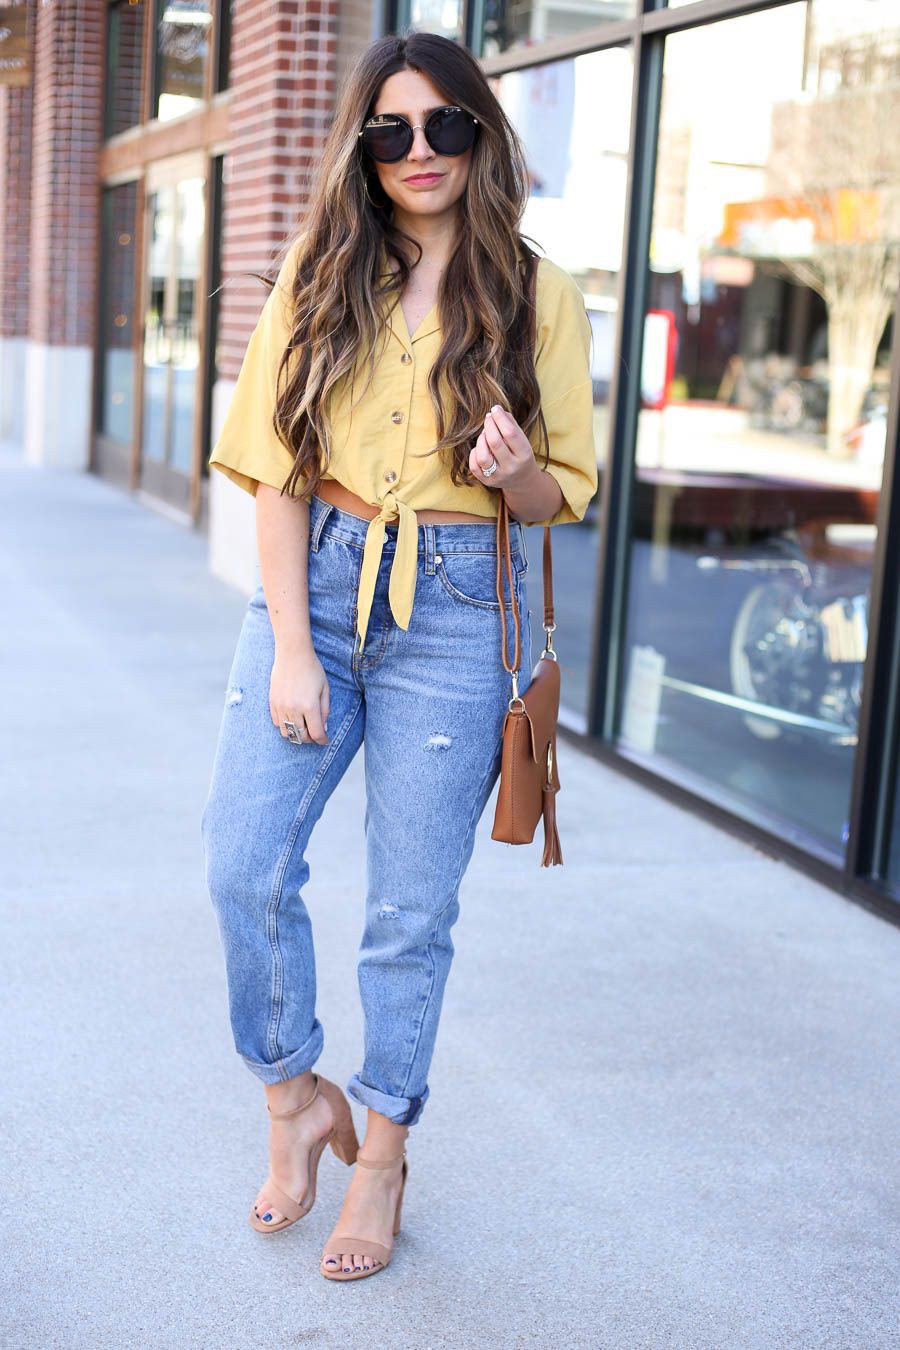 Brunch Outfit Ideas, Casual wear, Mom jeans | Brunch Outfit Ideas ...